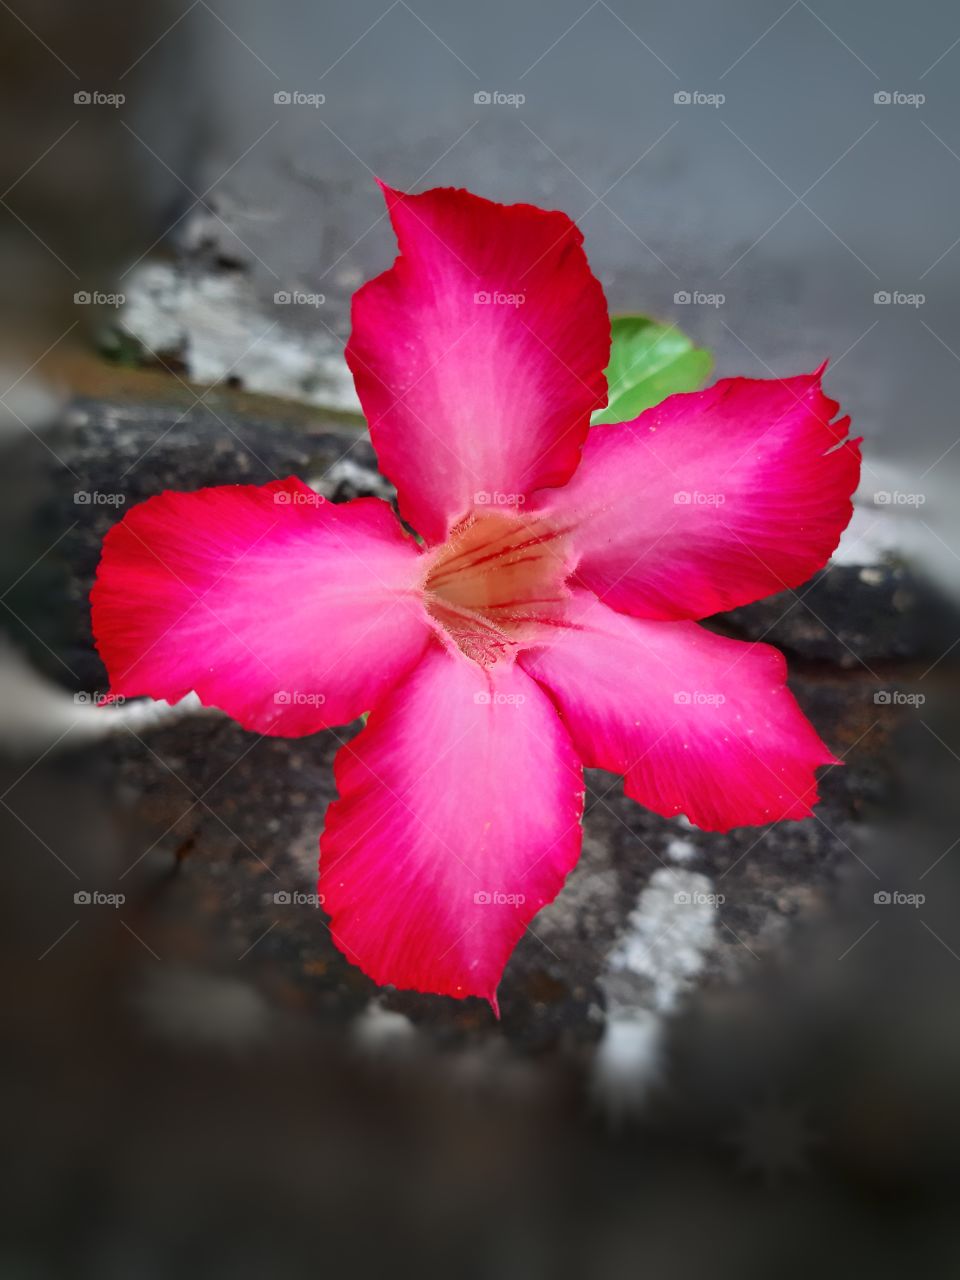 A focused pink frangipani flower with rocky wall as a background